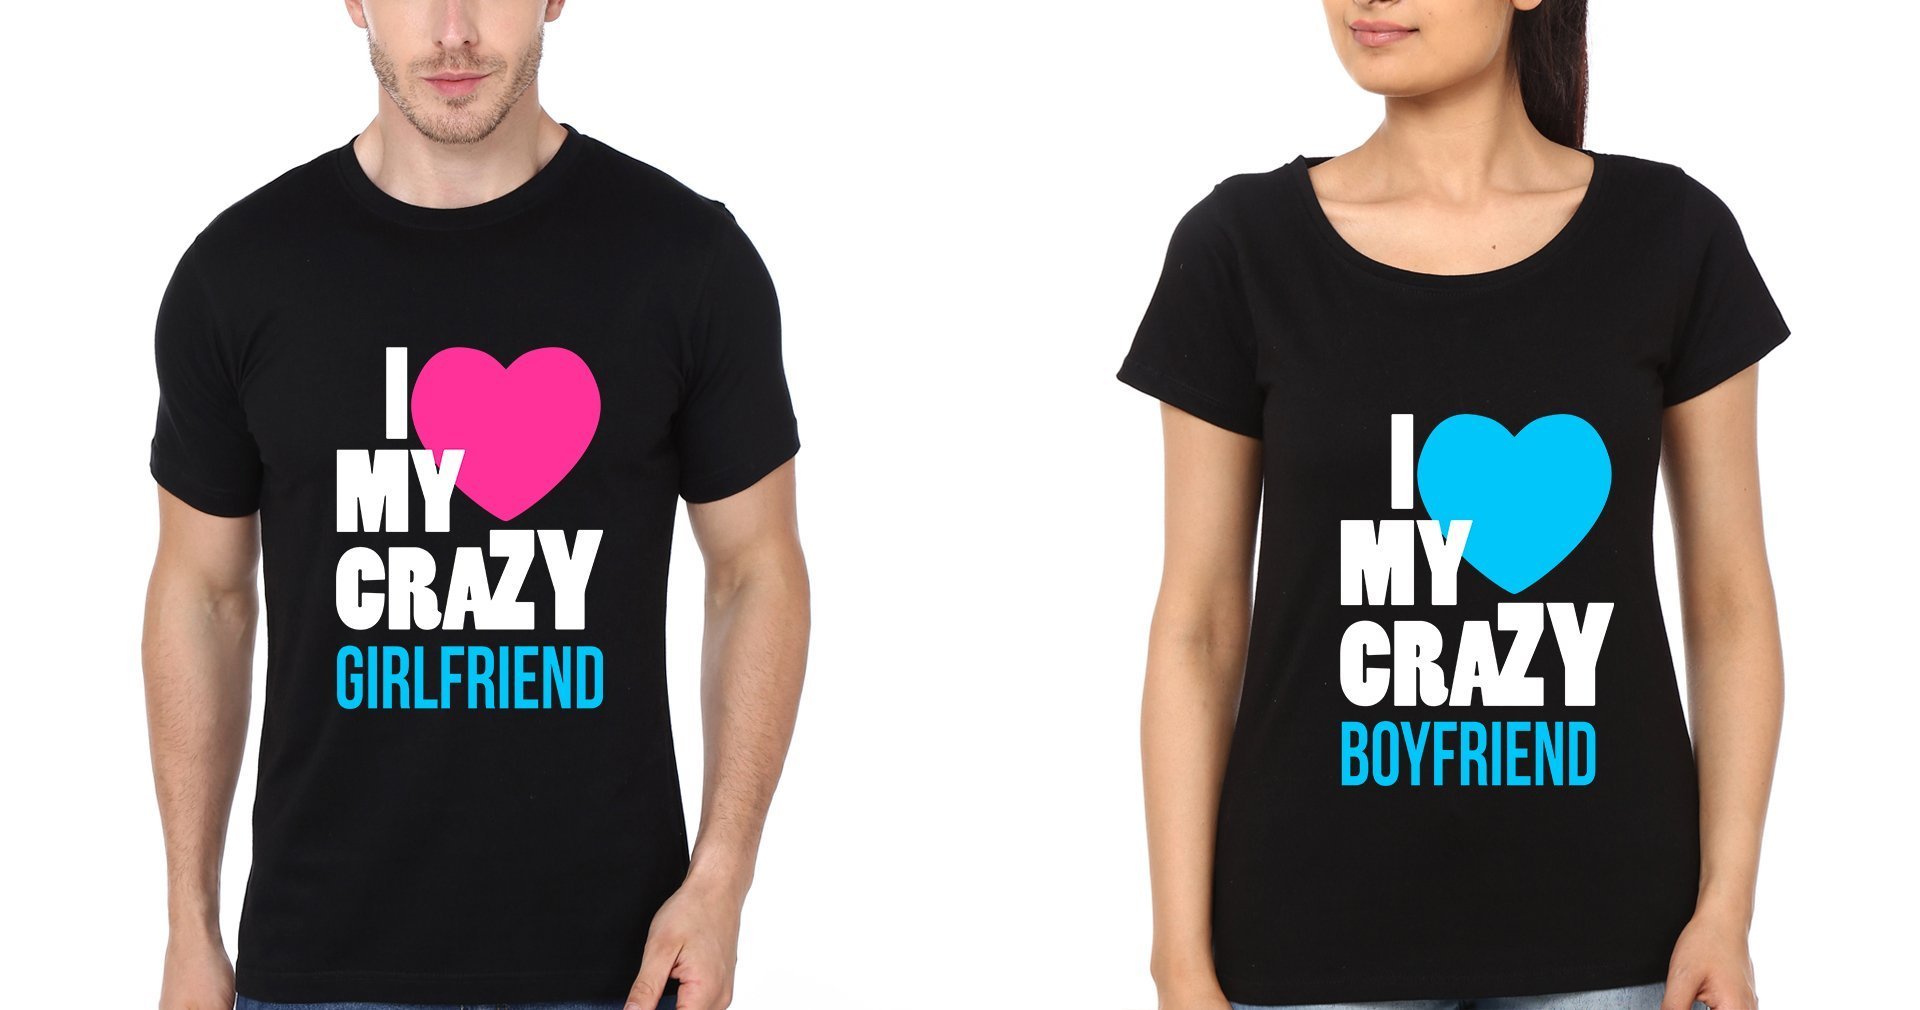 I LOVE GIRLFRIEND Couple Half Sleeves T-Shirts -FunkyTradition - FunkyTradition